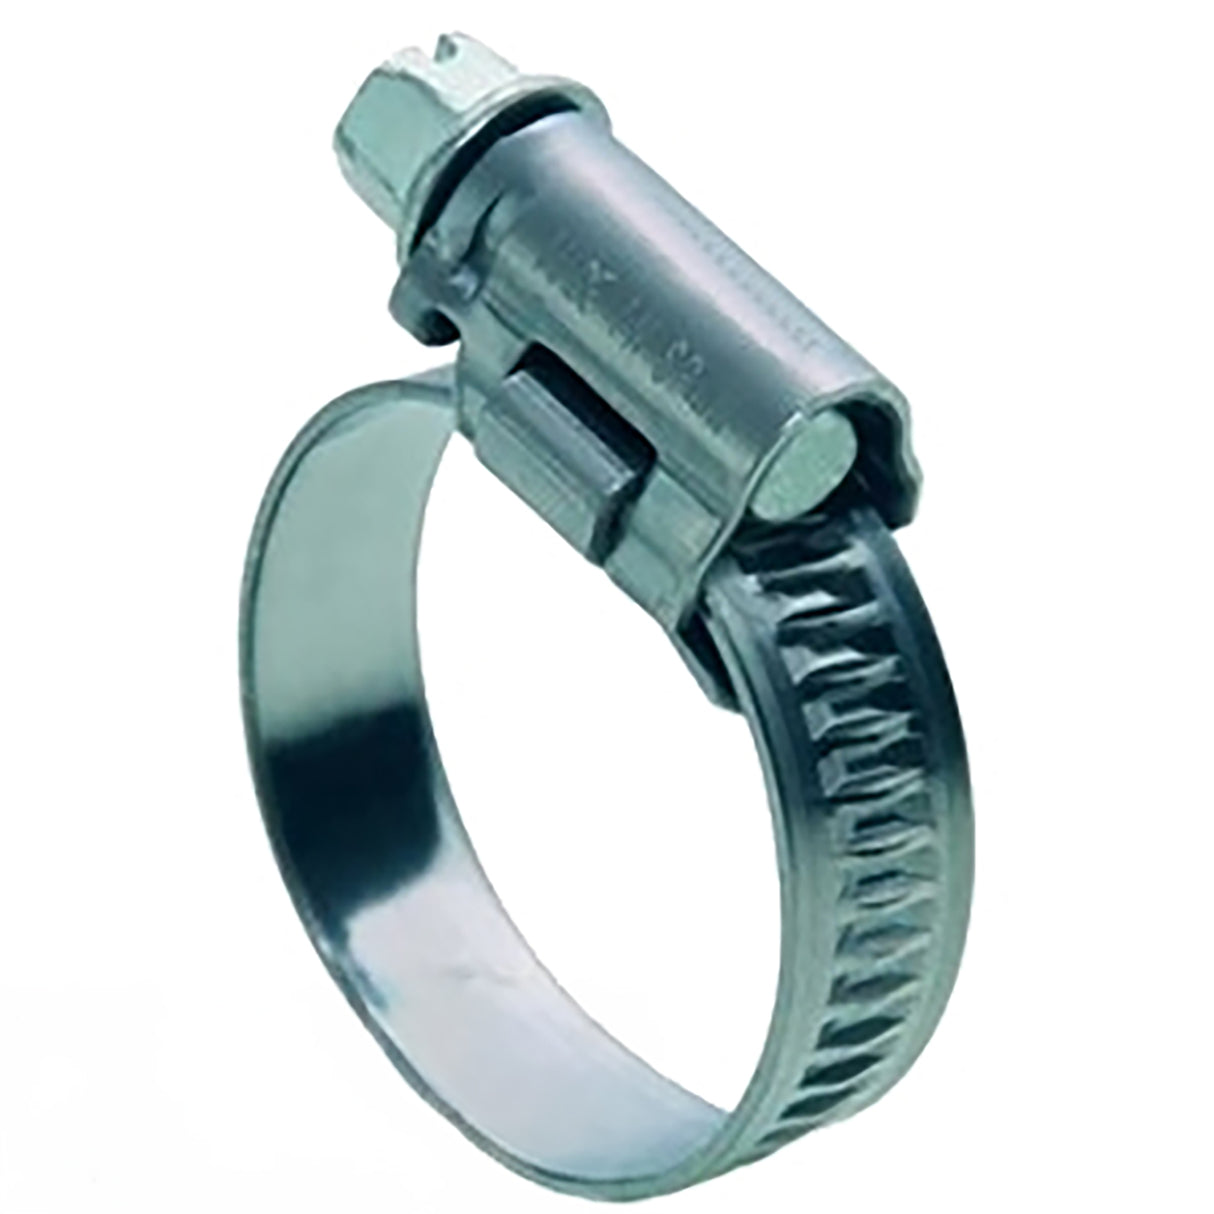 Hose clamp stainless steel 16-27